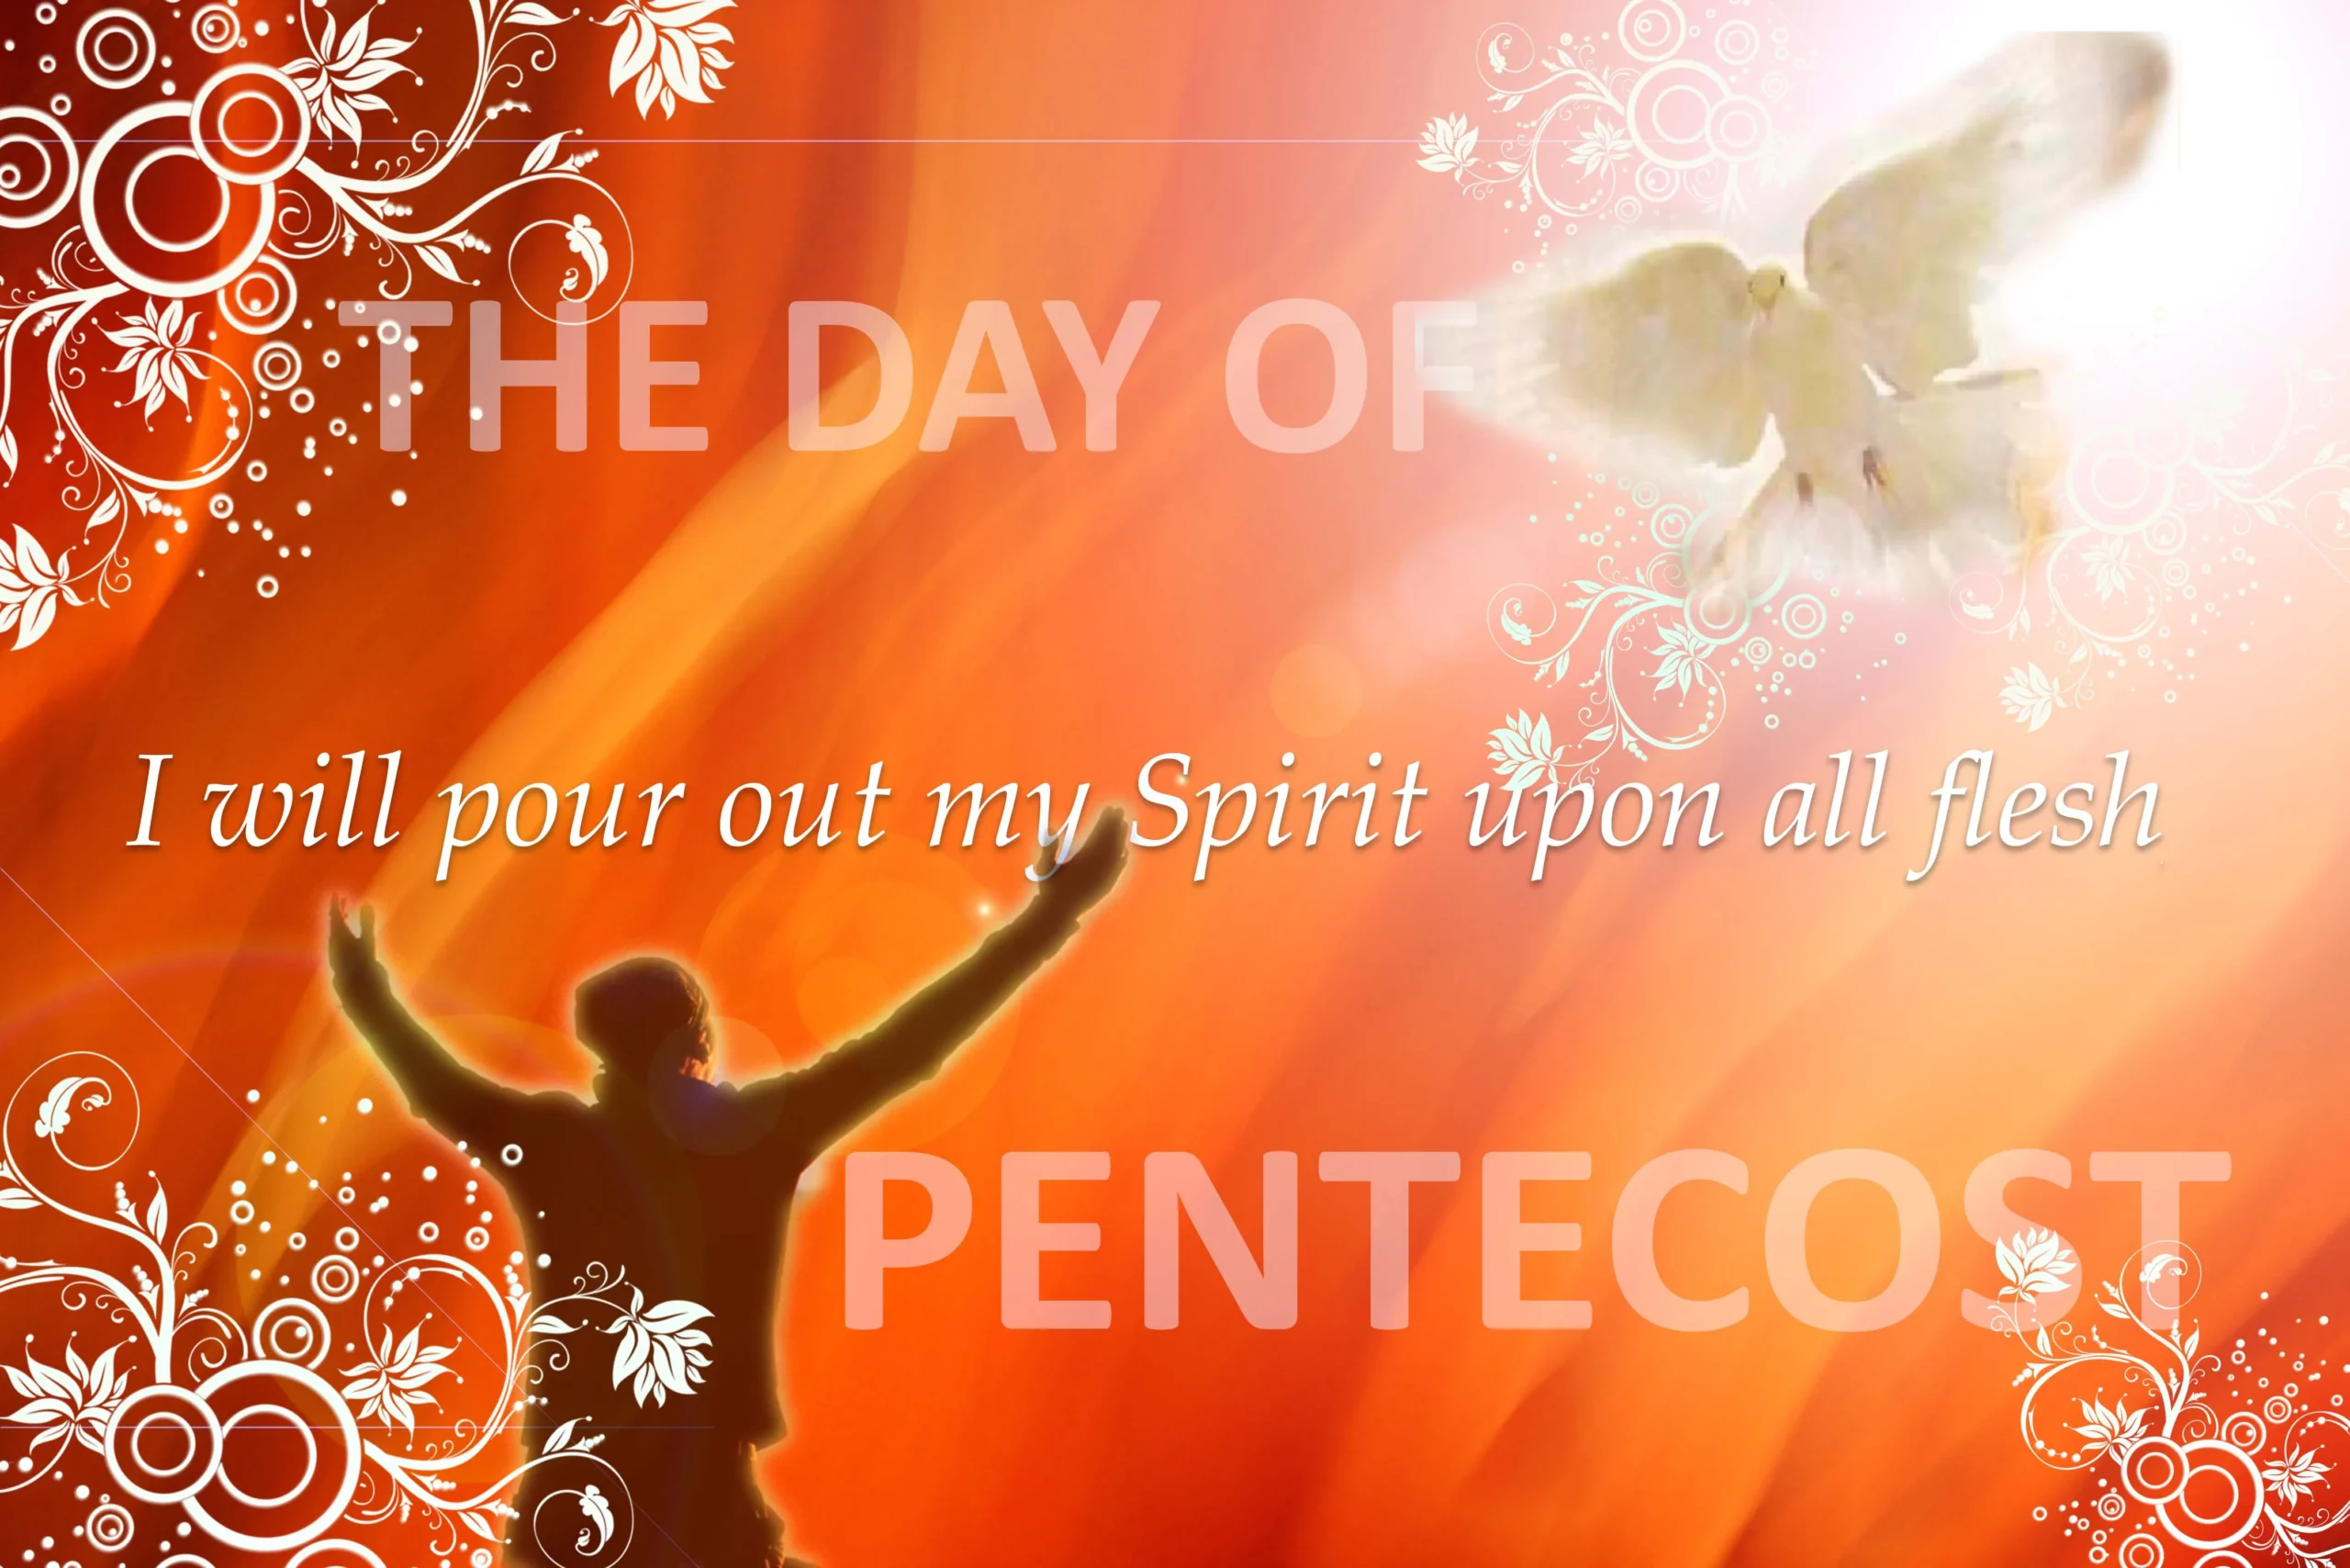 what happens on pentecost day